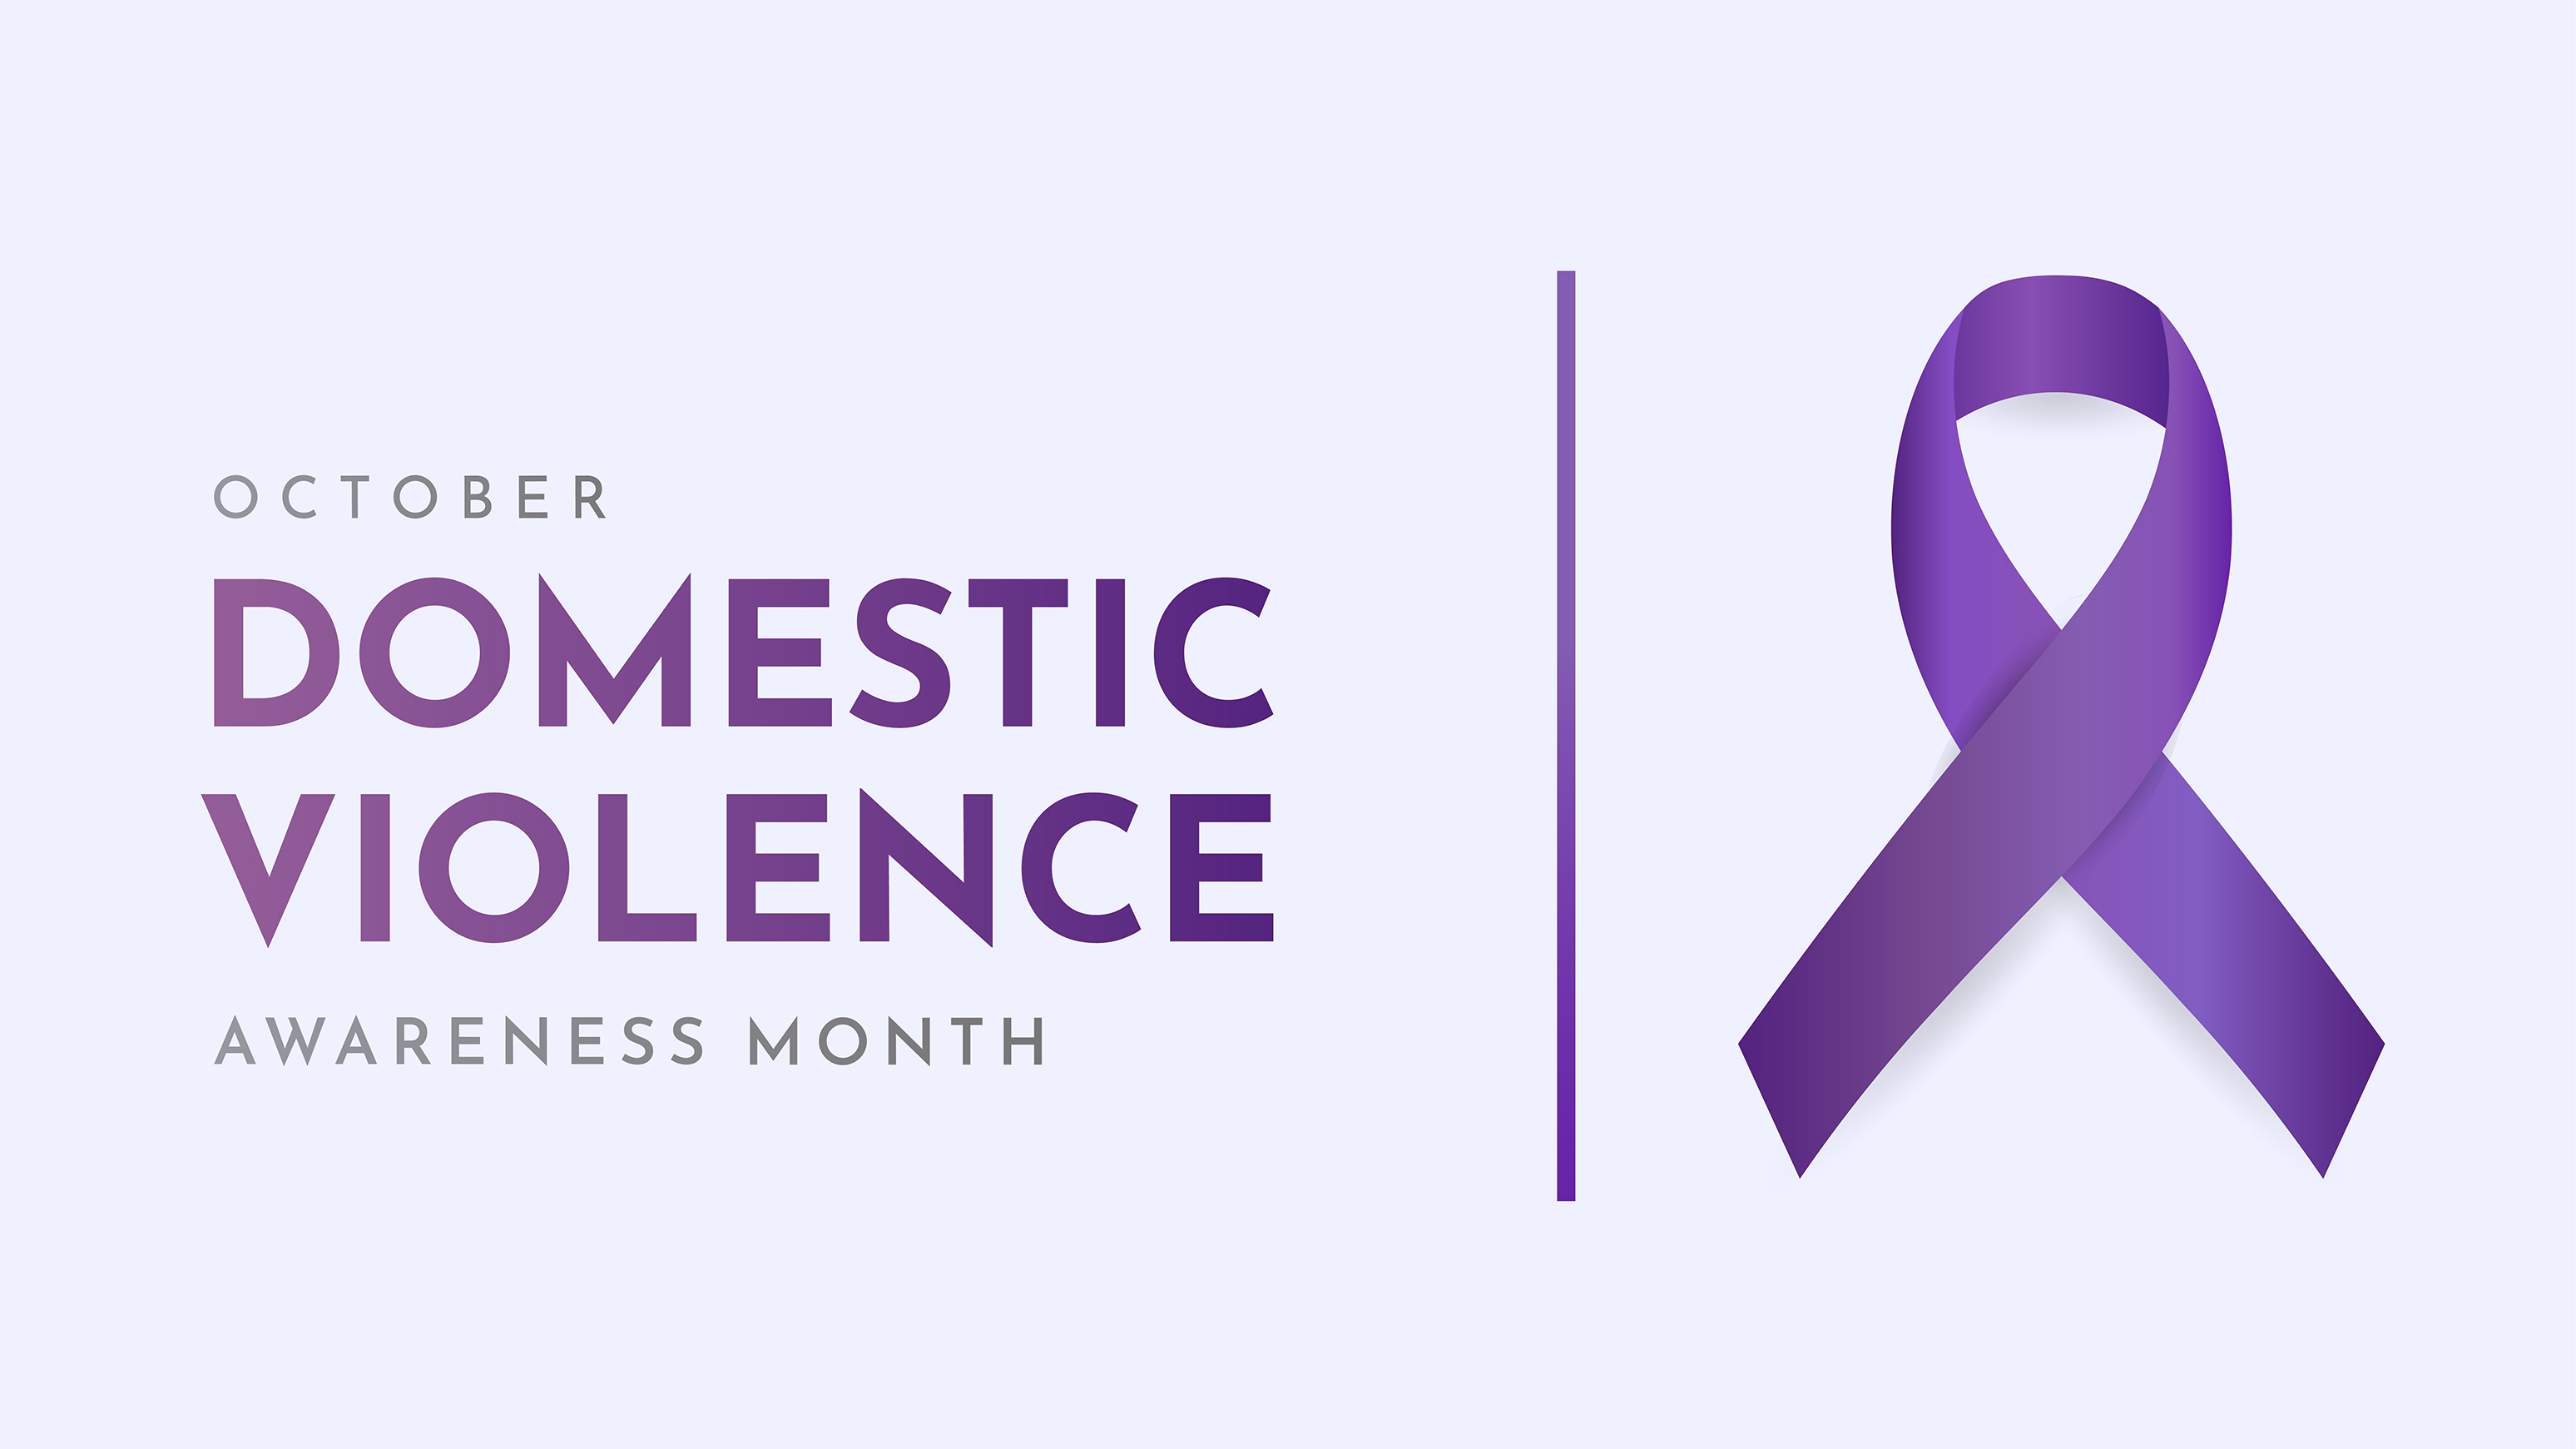 During National Domestic Violence Awareness Month, Attorney General